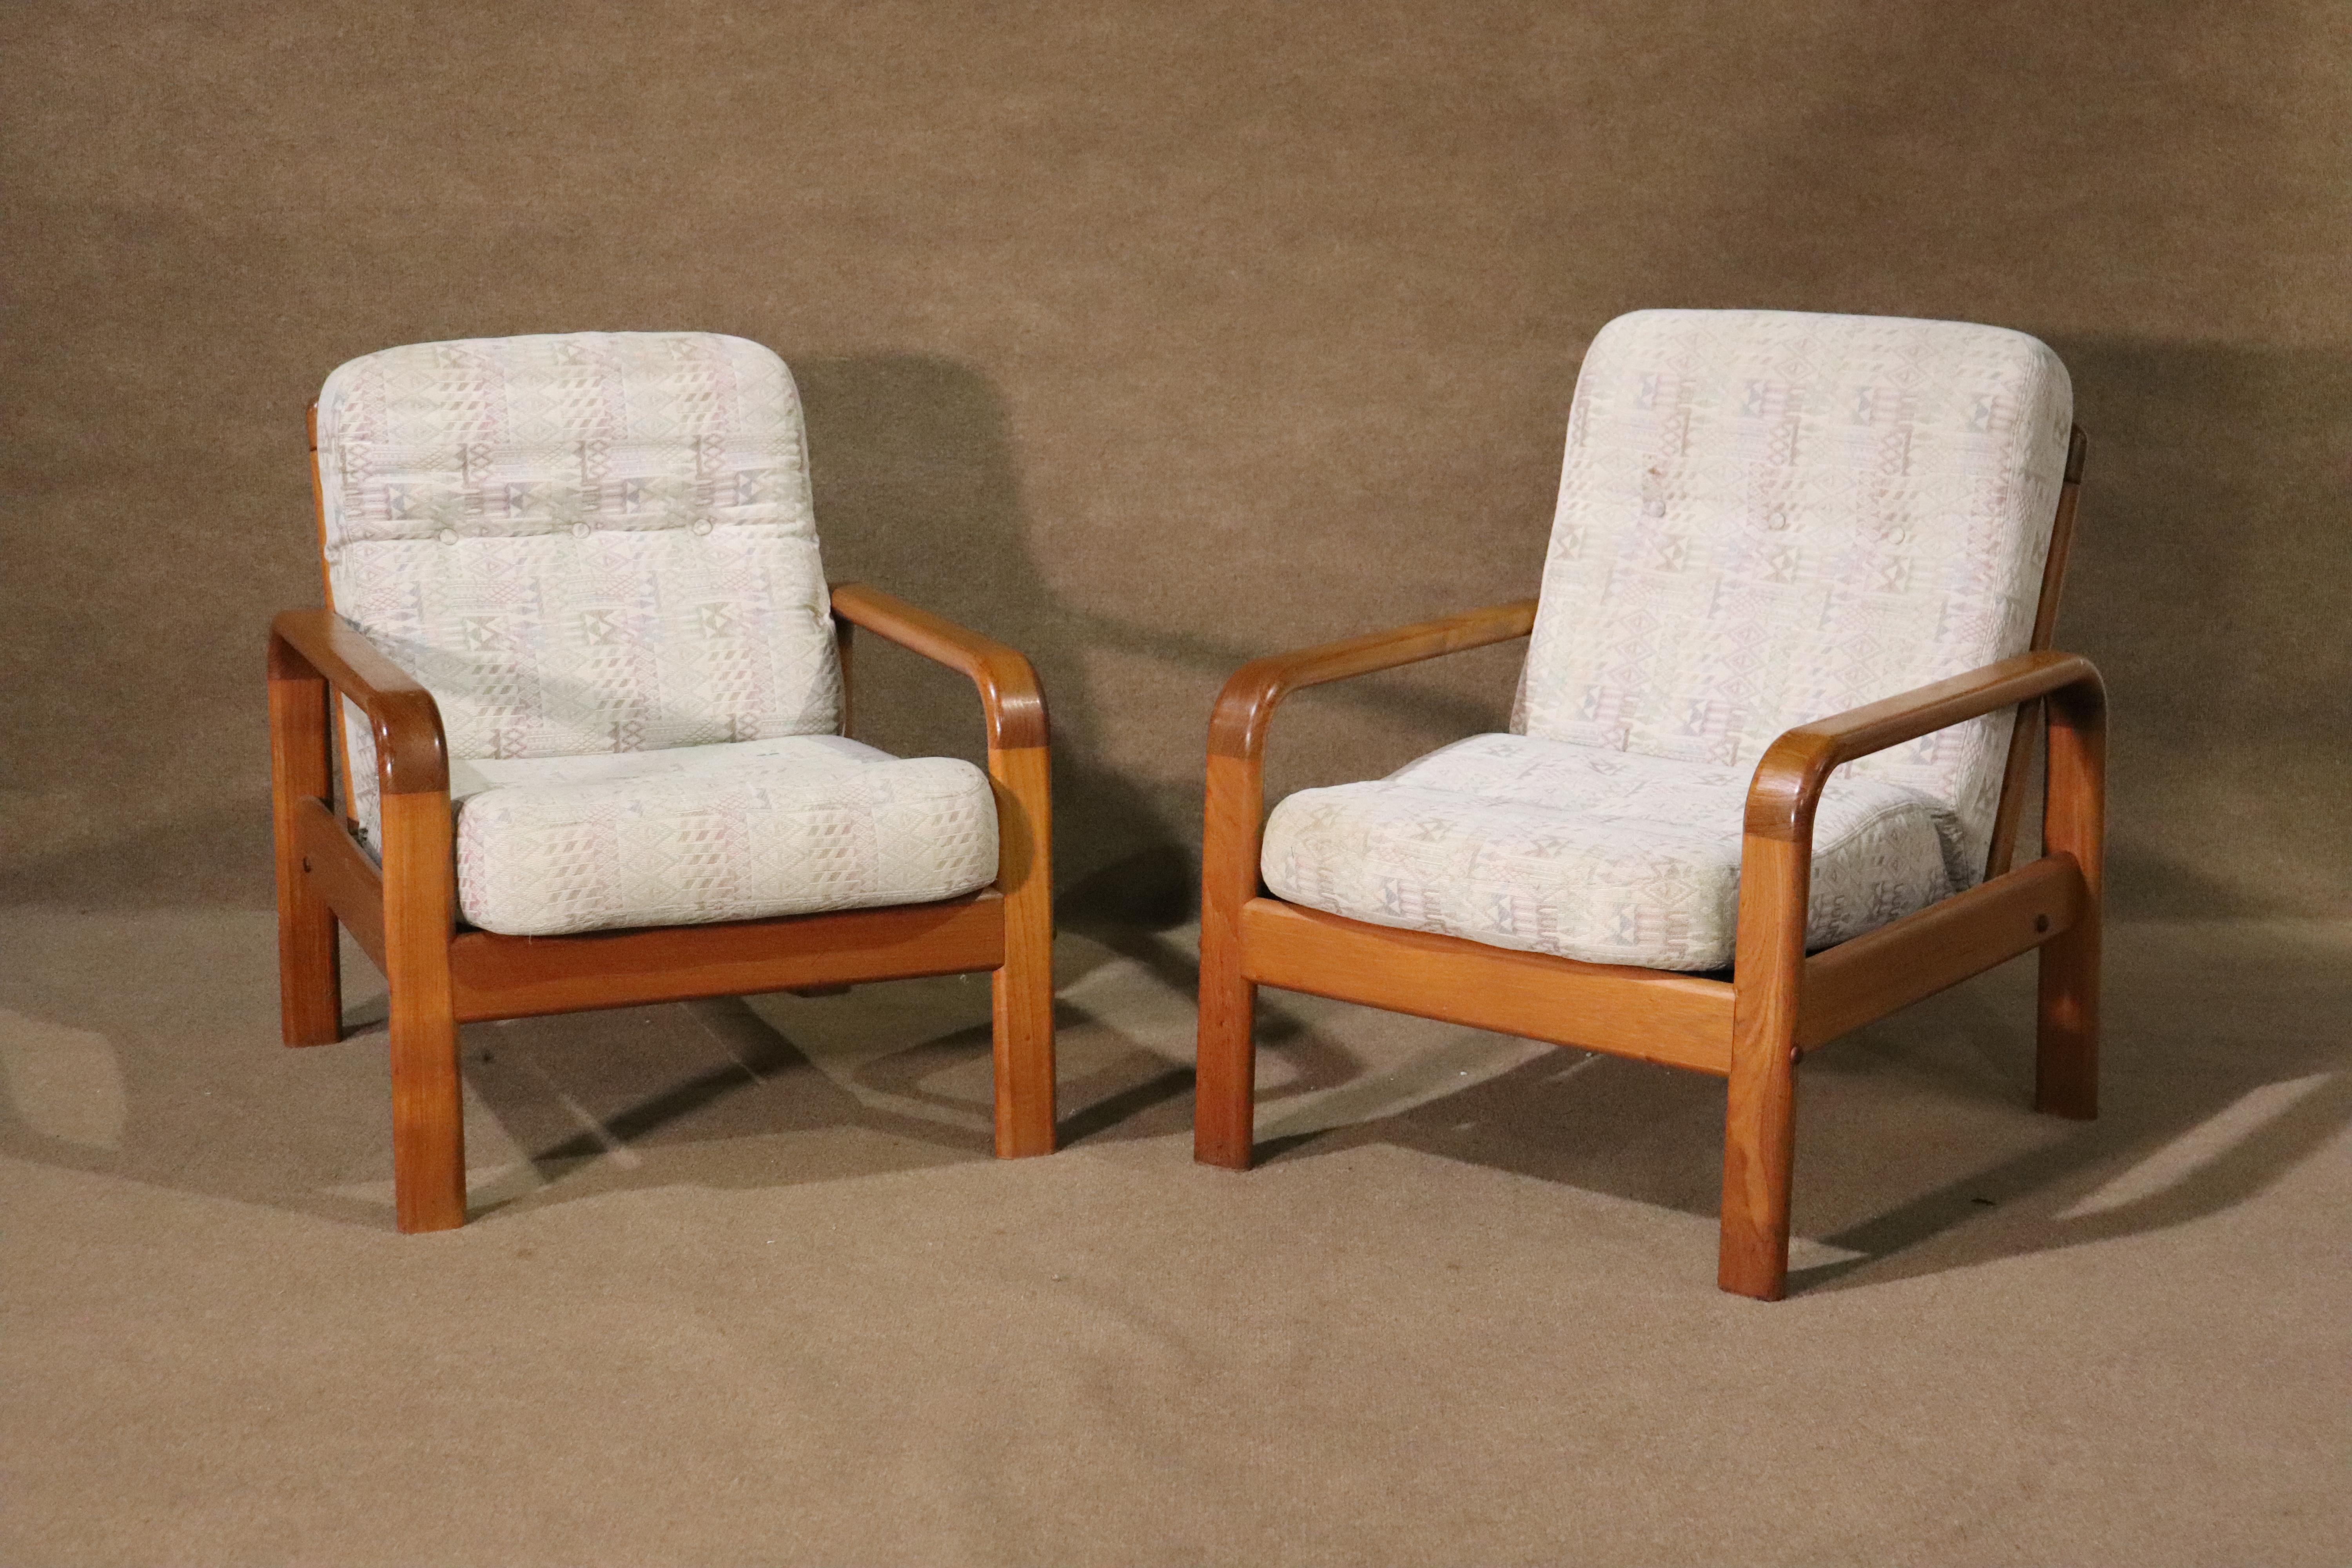 Pair of mid-century Danish made lounge chairs in teak wood. Bentwood arms and thick slat backs.
Please confirm location NY or NJ